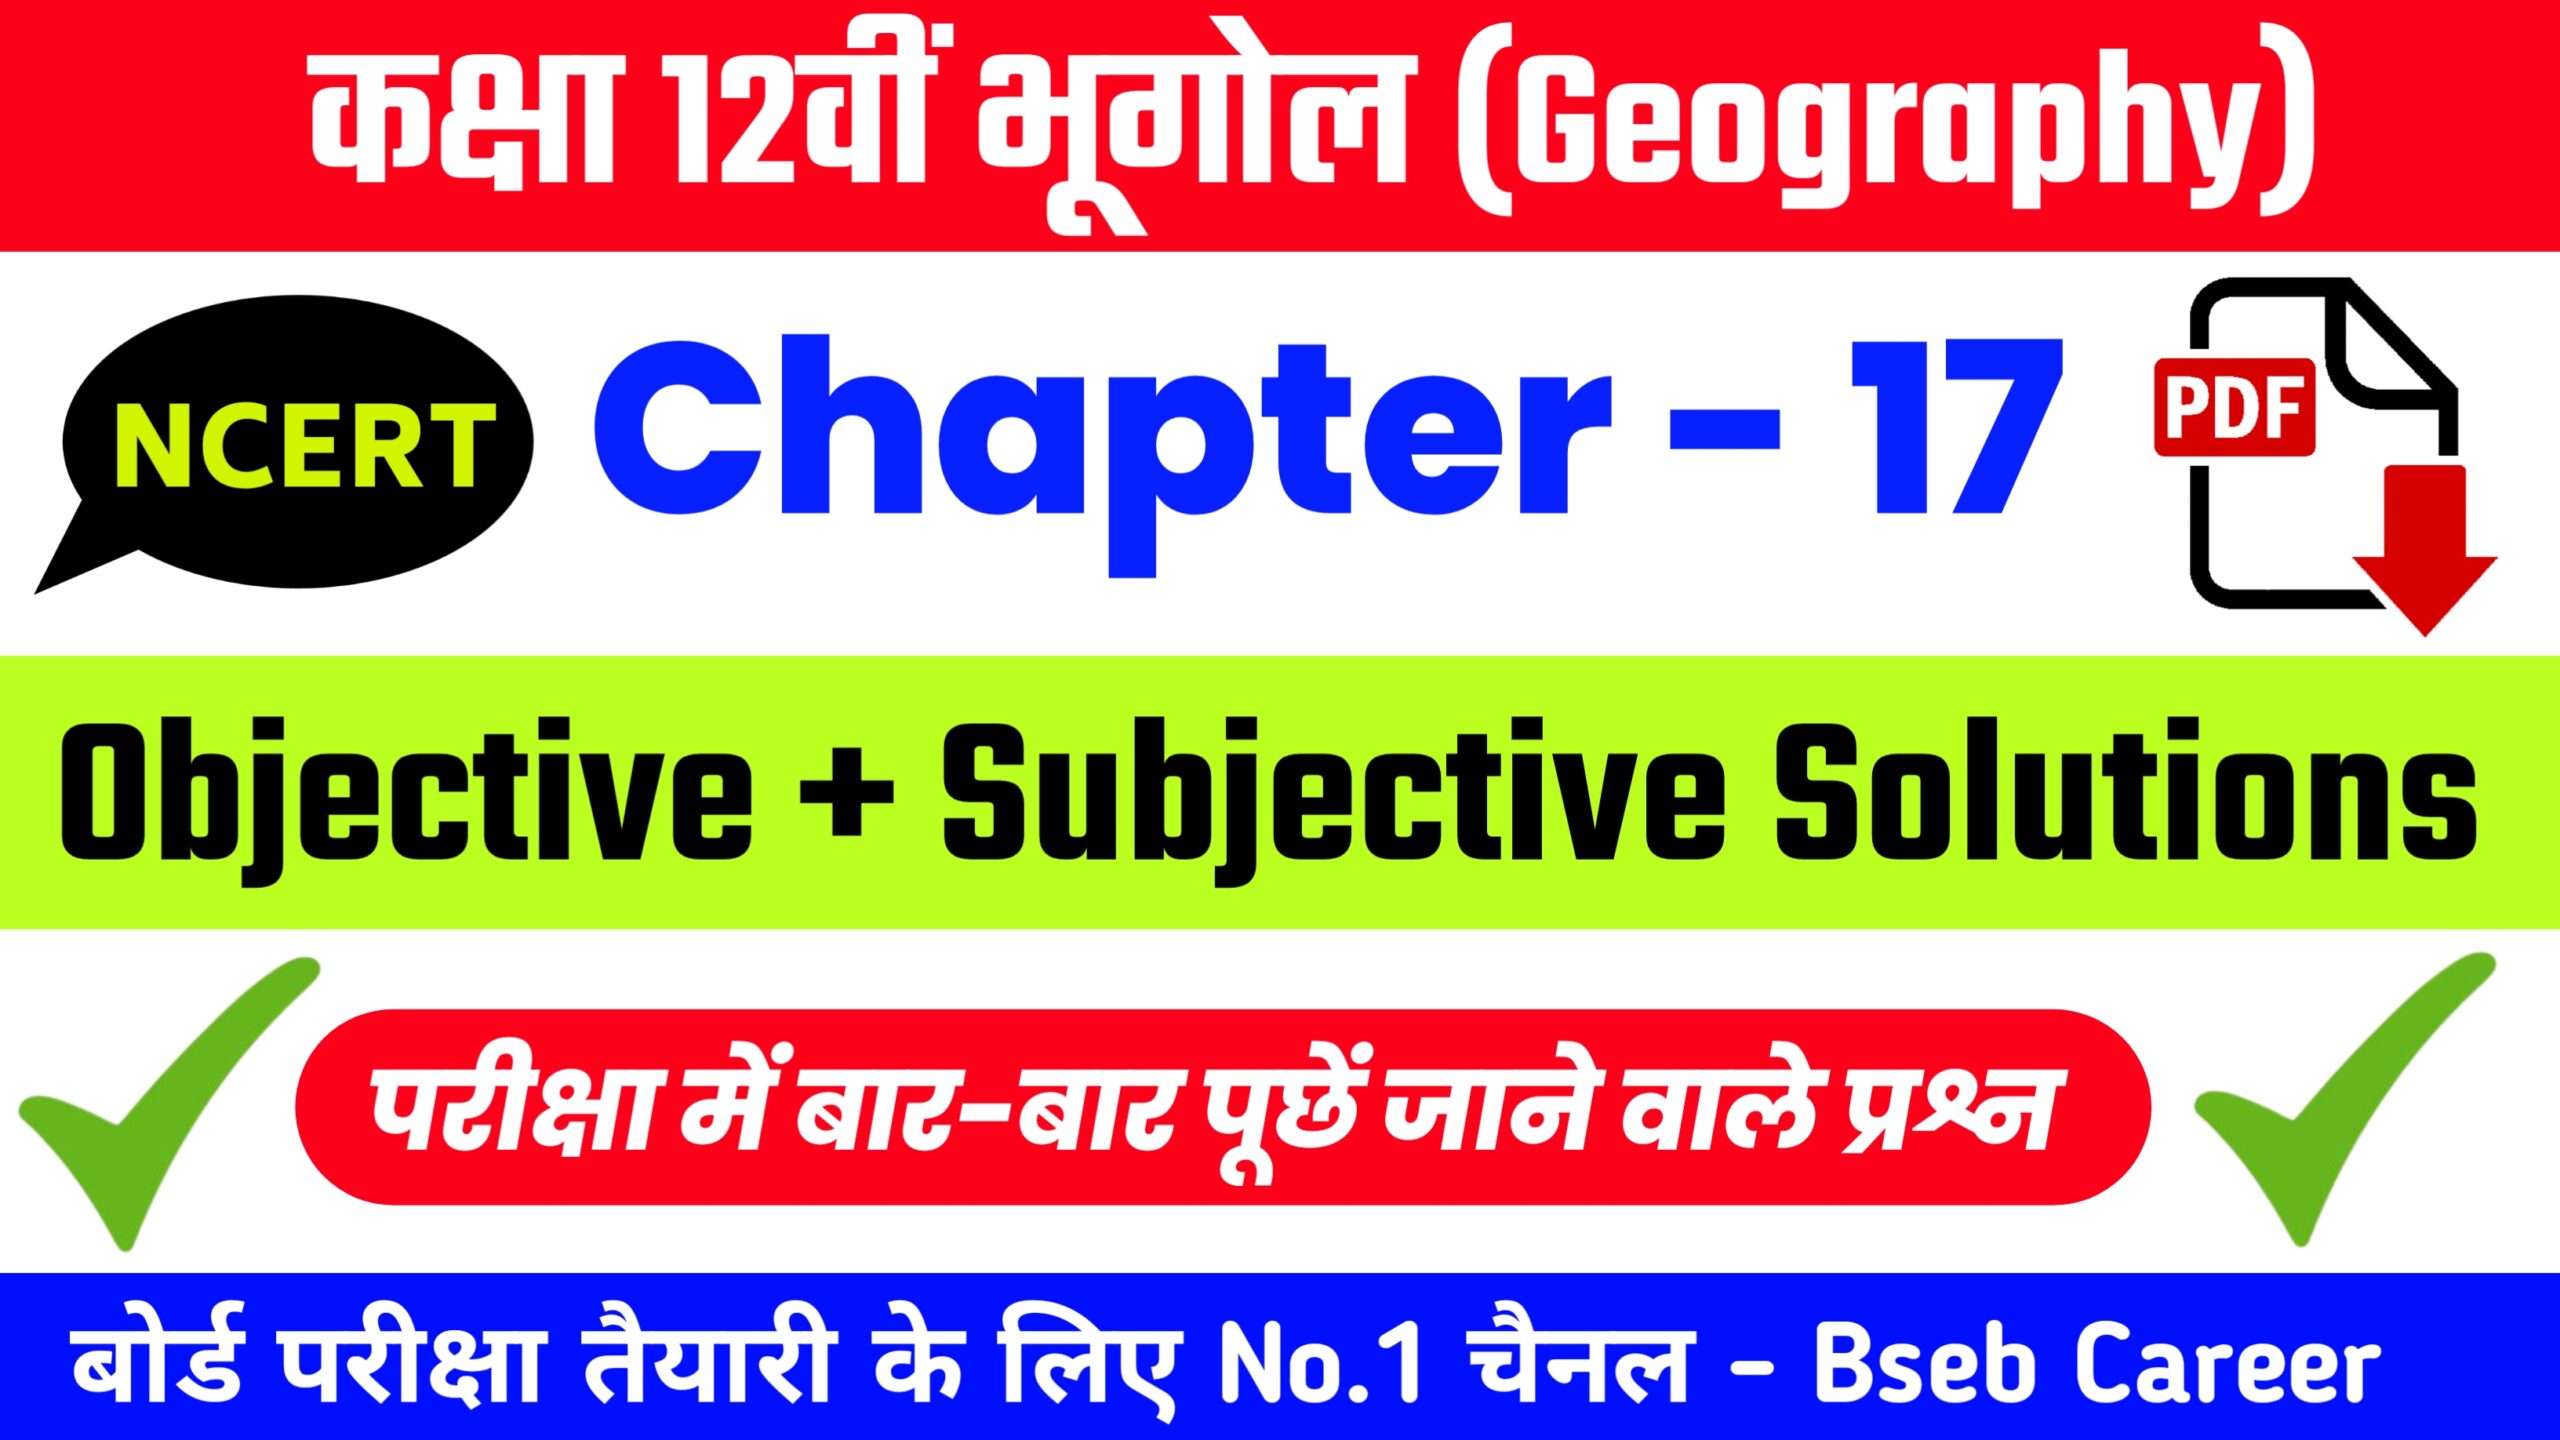 Class 12th Geography Chapter 17